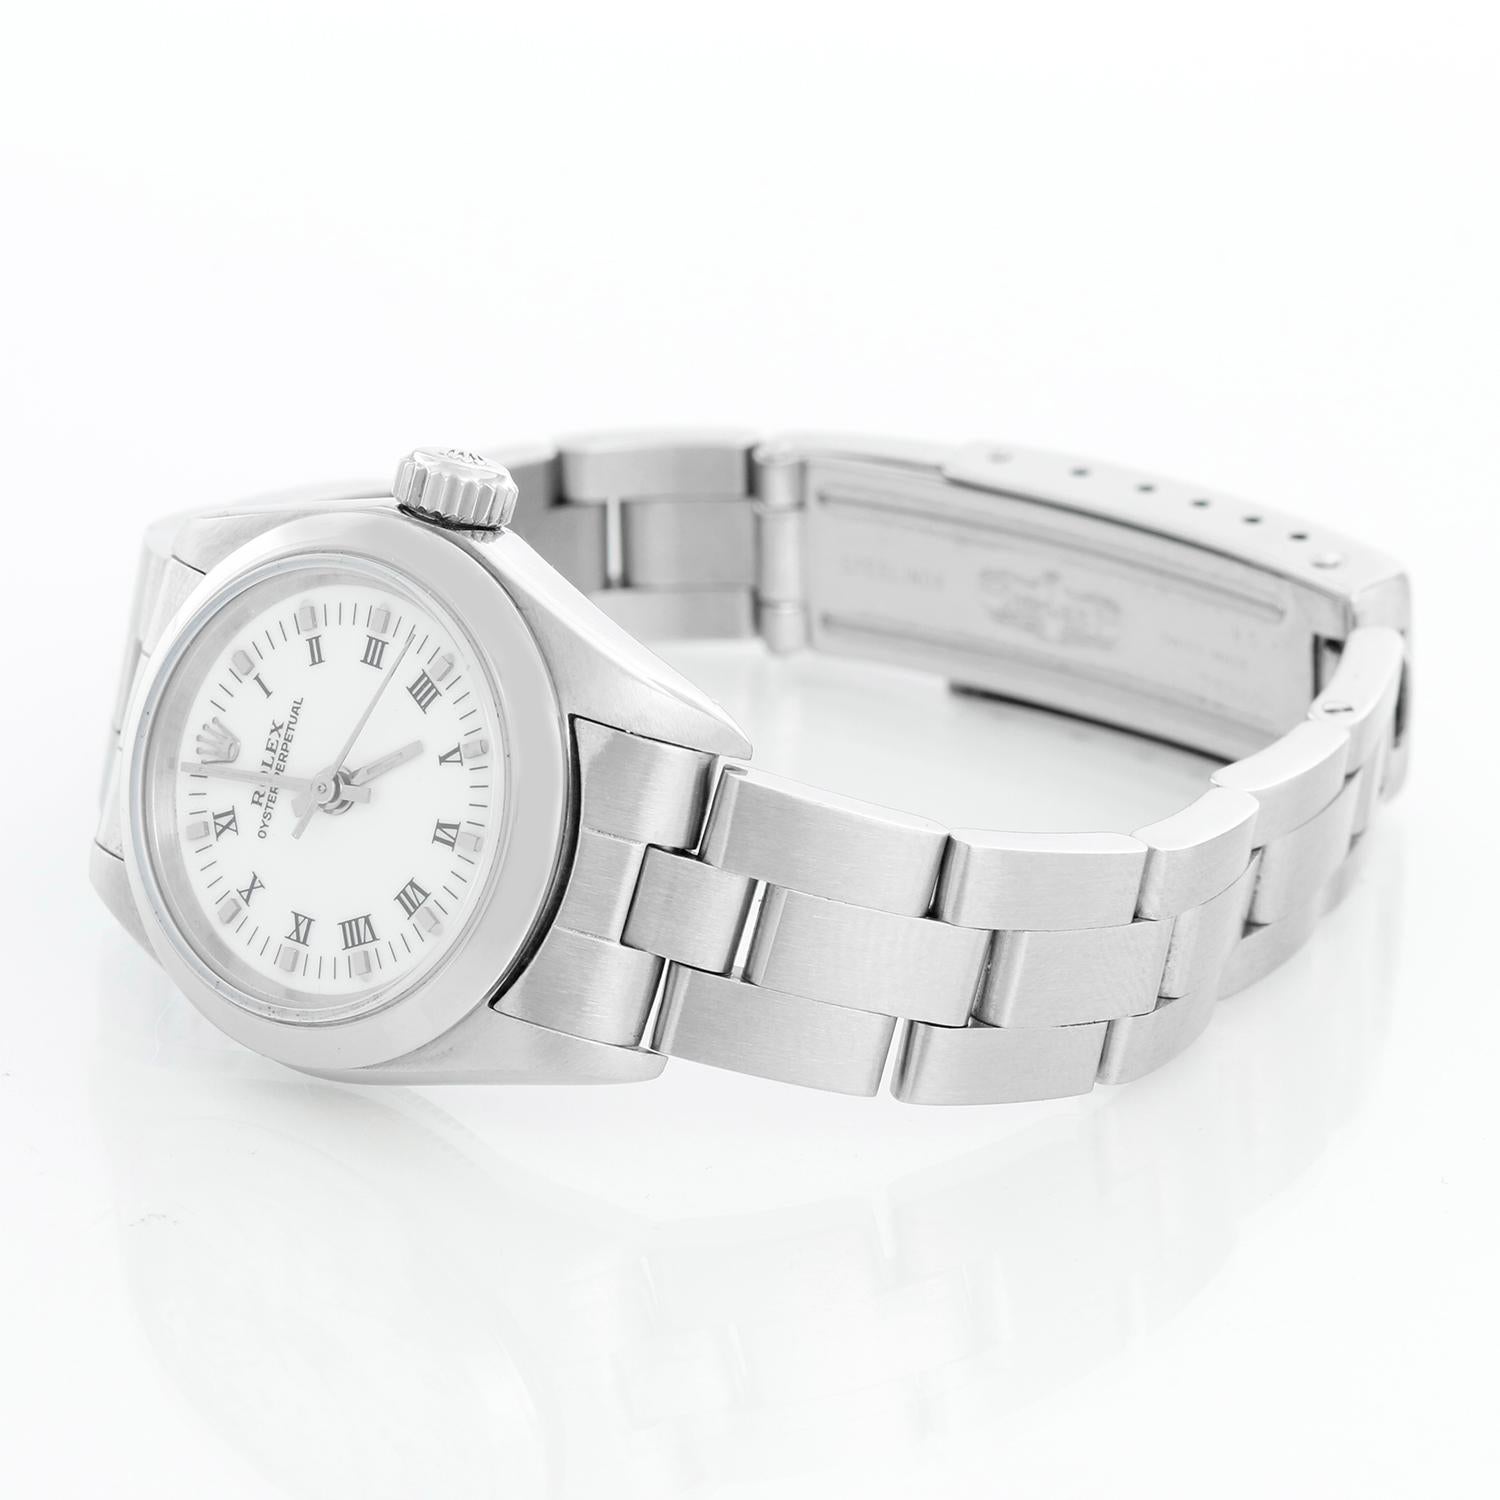 Rolex Ladies Oyster Perpetual No-Date Stainless Steel Watch 67180 - Automatic winding. Stainless steel case with smooth bezel (26 mm). White dial . Stainless steel Oyster bracelet. Pre-owned with custom box.